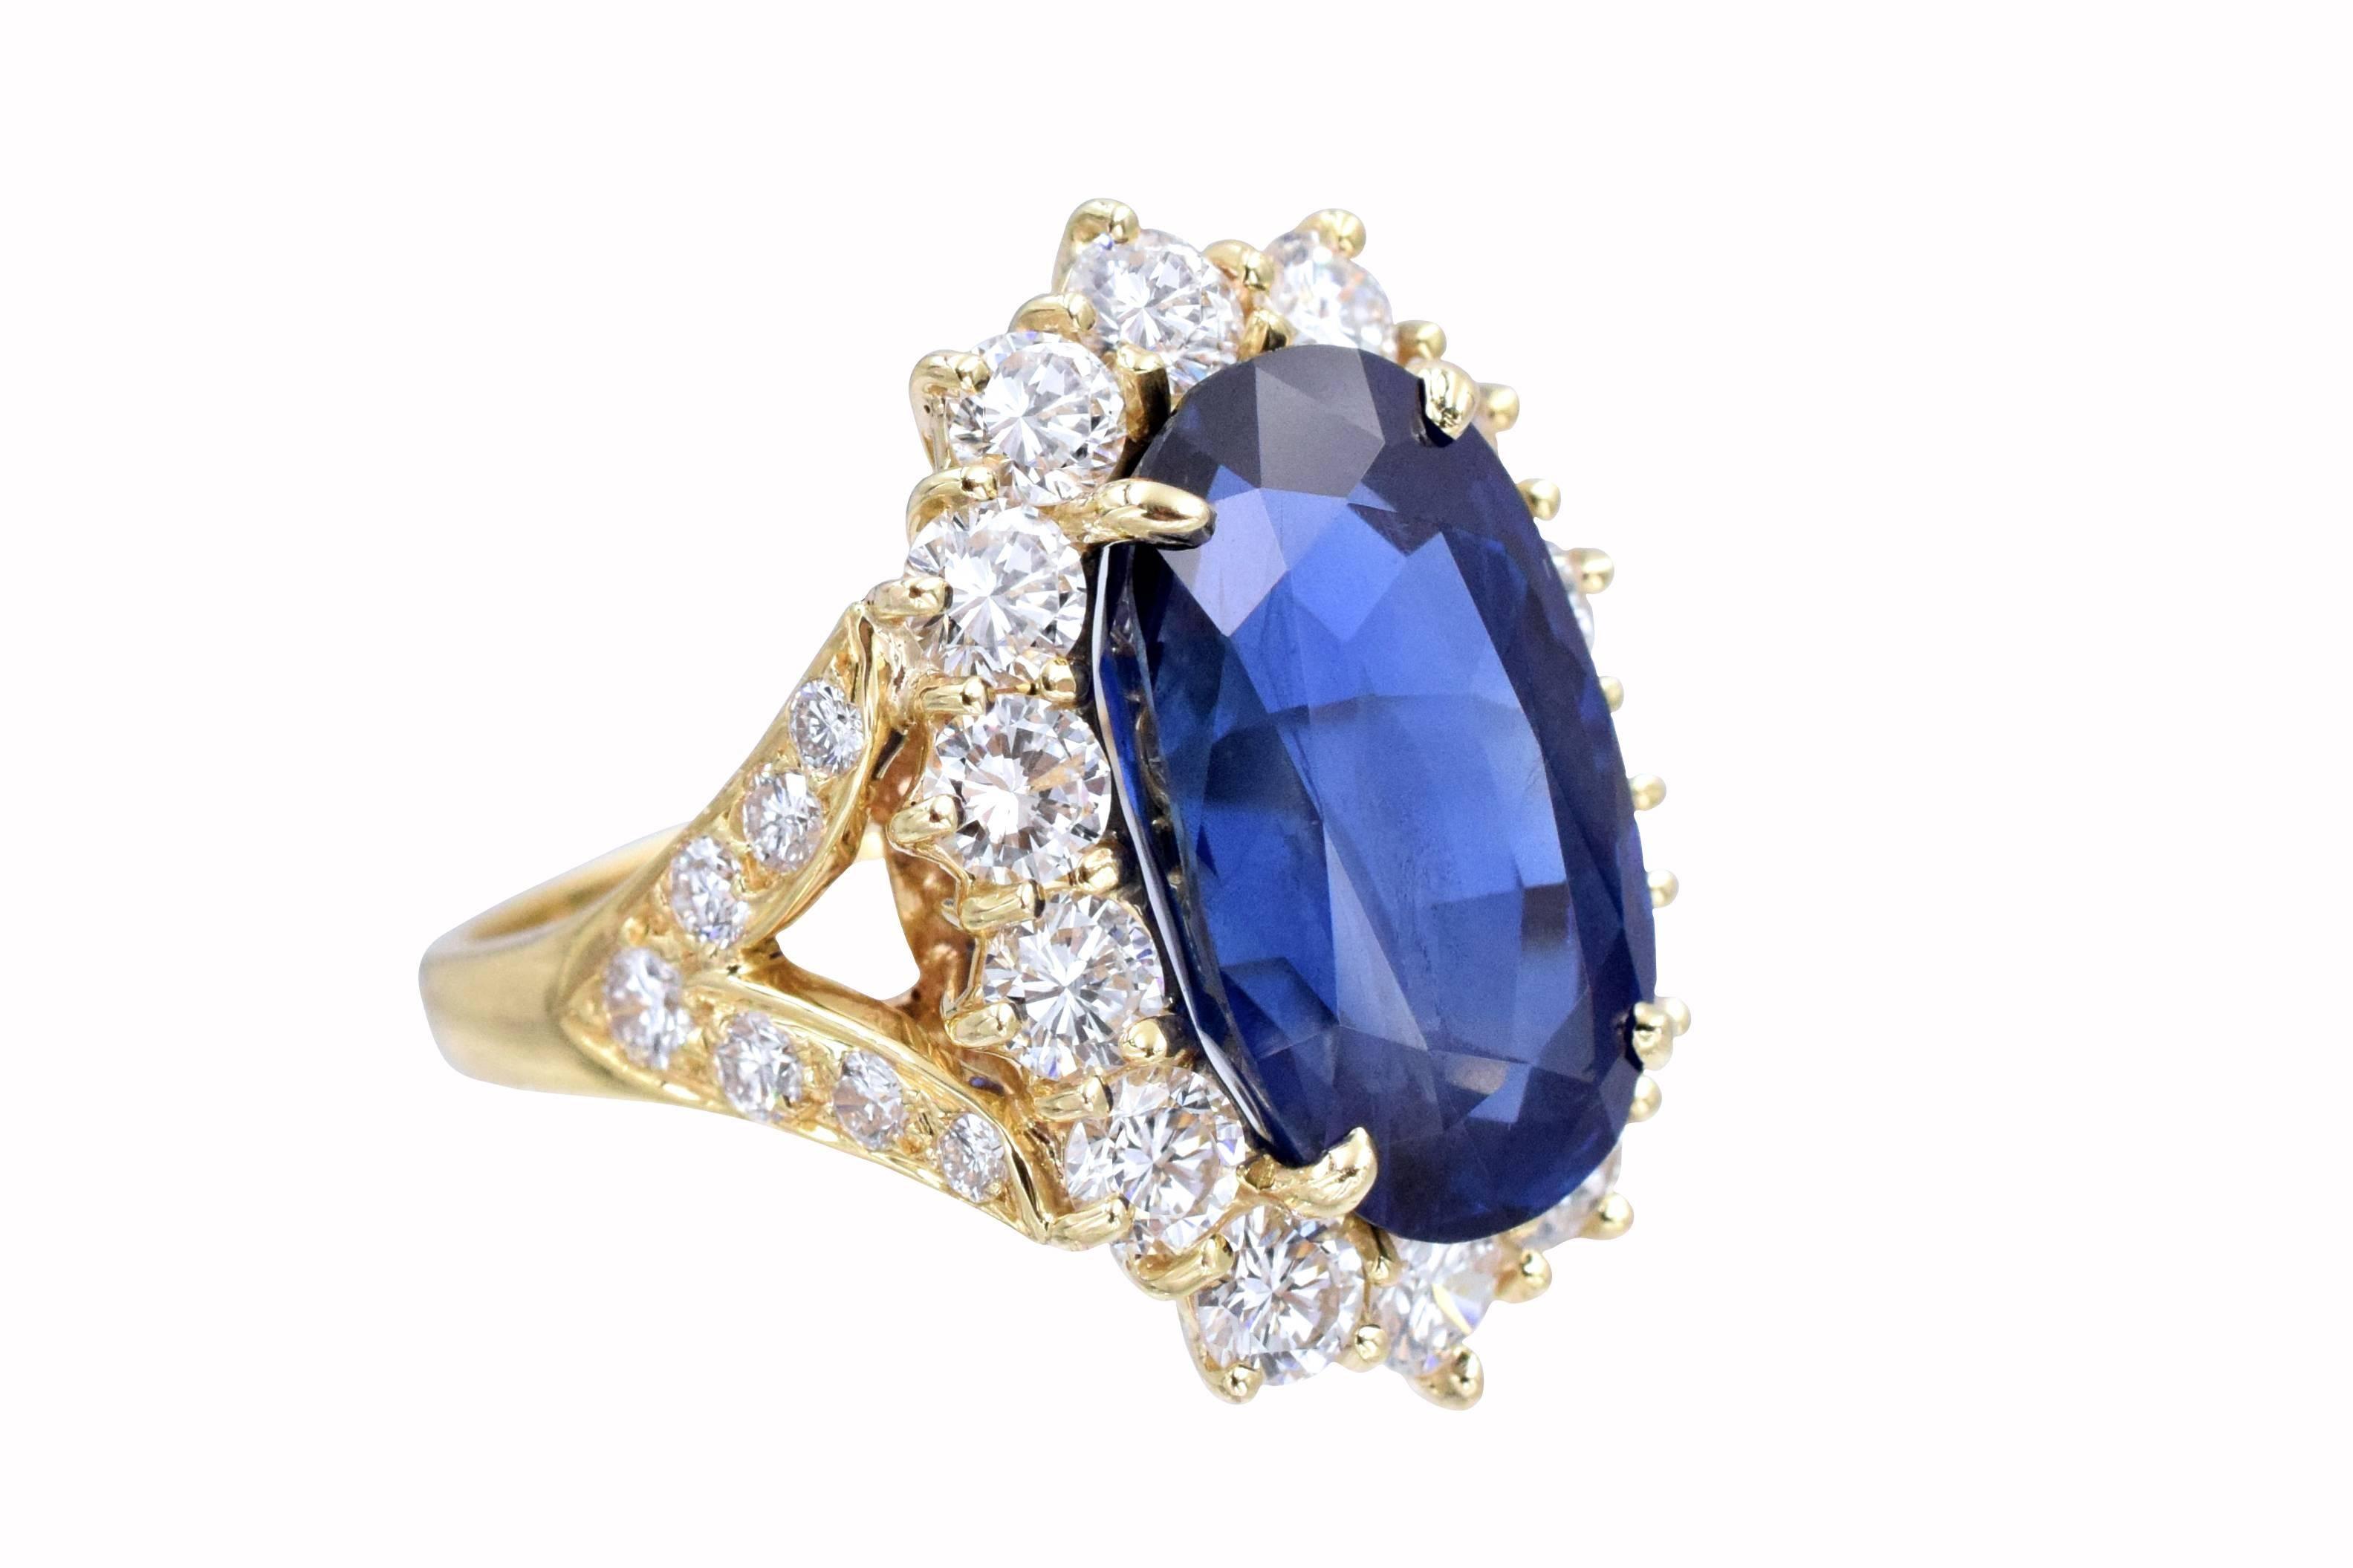 Van Cleef and Arpels Burmese sapphire and diamond ring.

Set with natural no enhancement oval old cut Burmese 12.01 carat sapphire, surrounded by 14 fine quality  brilliant shape diamonds. Sides are V shaped leaves with 7 encrusted diamonds each